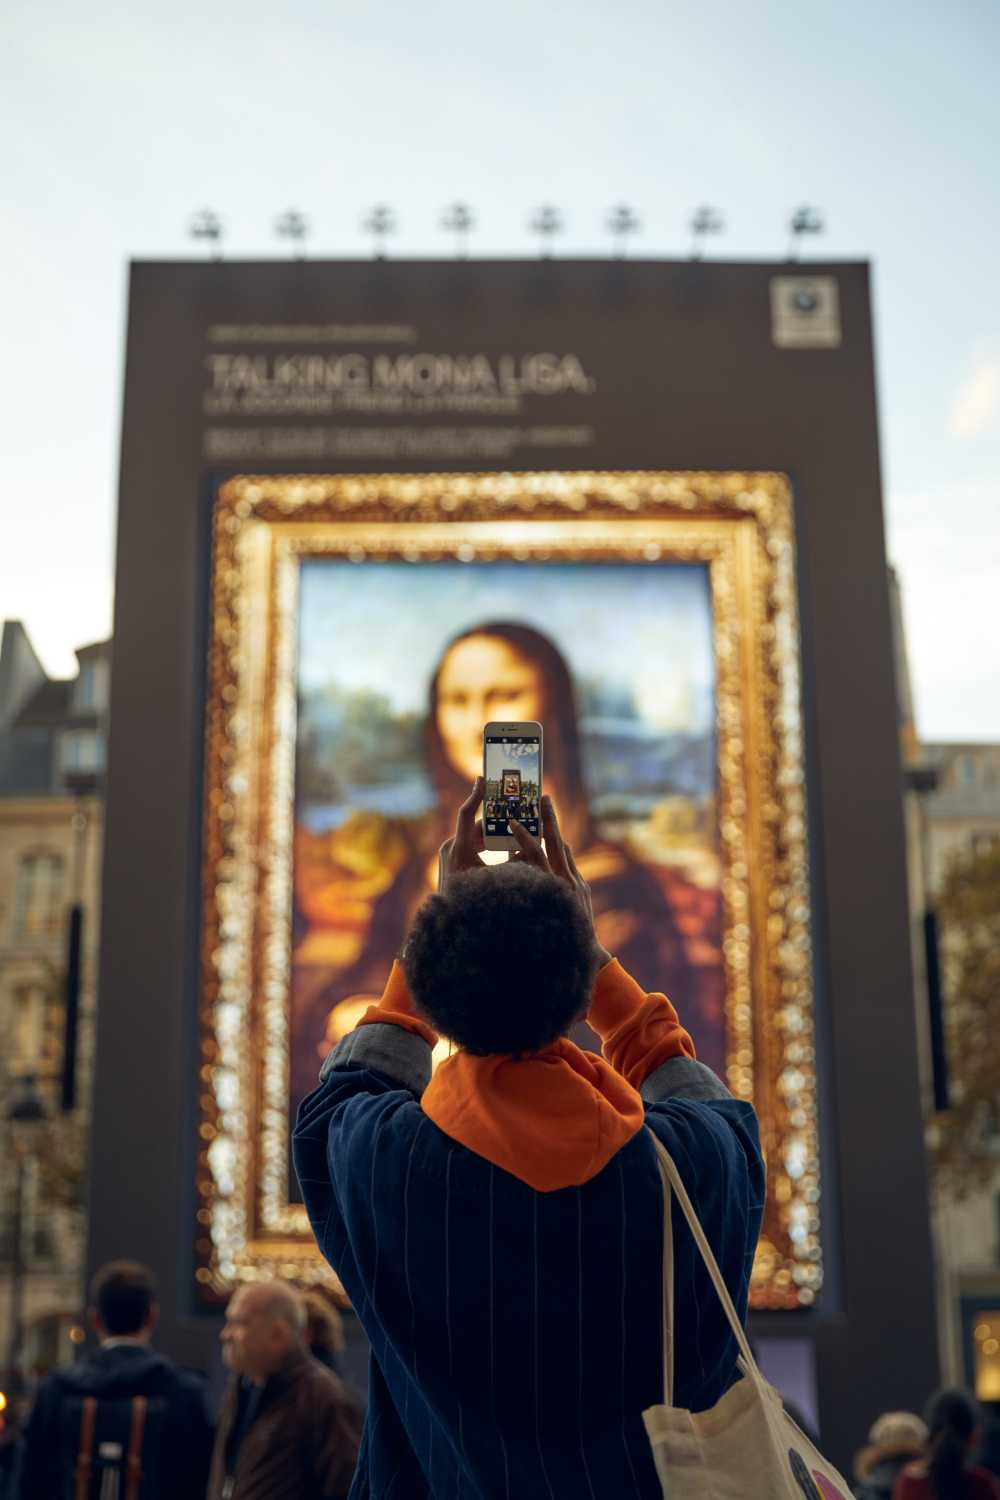 “Hey Mona Lisa…”. BMW spotlights the new BMW Intelligent Personal Assistant at the “Mondial de l’Automobile 2018” at the Centre George Pompidou in Paris with a spectacular installation. 01 - 03 October 2018. (10/2018)